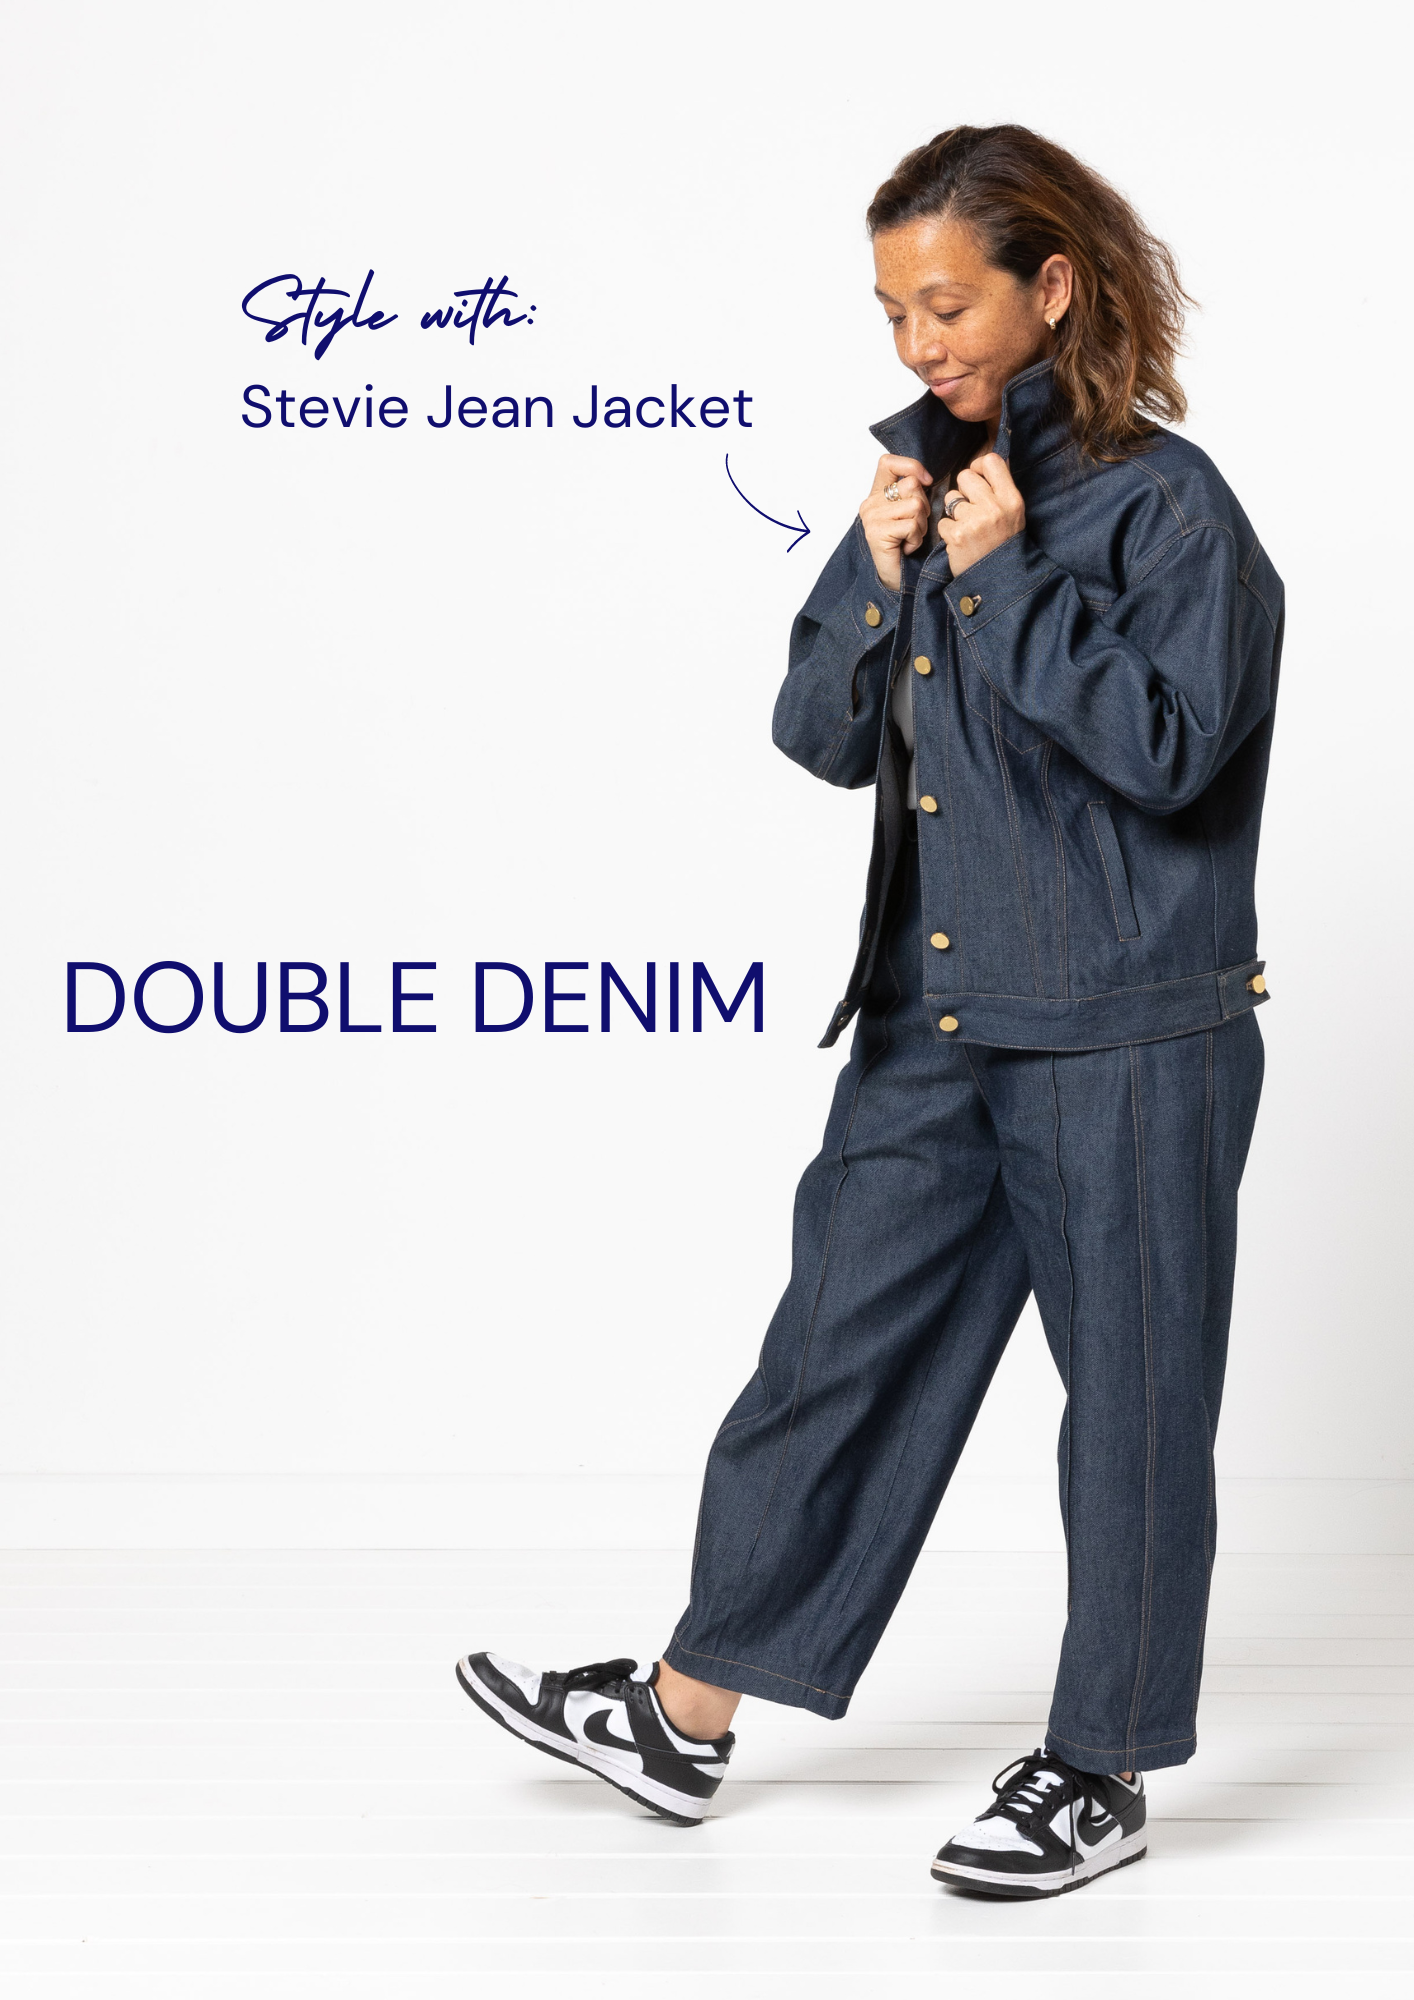 Double Denim! Styled with the Stevie Jean Jacket